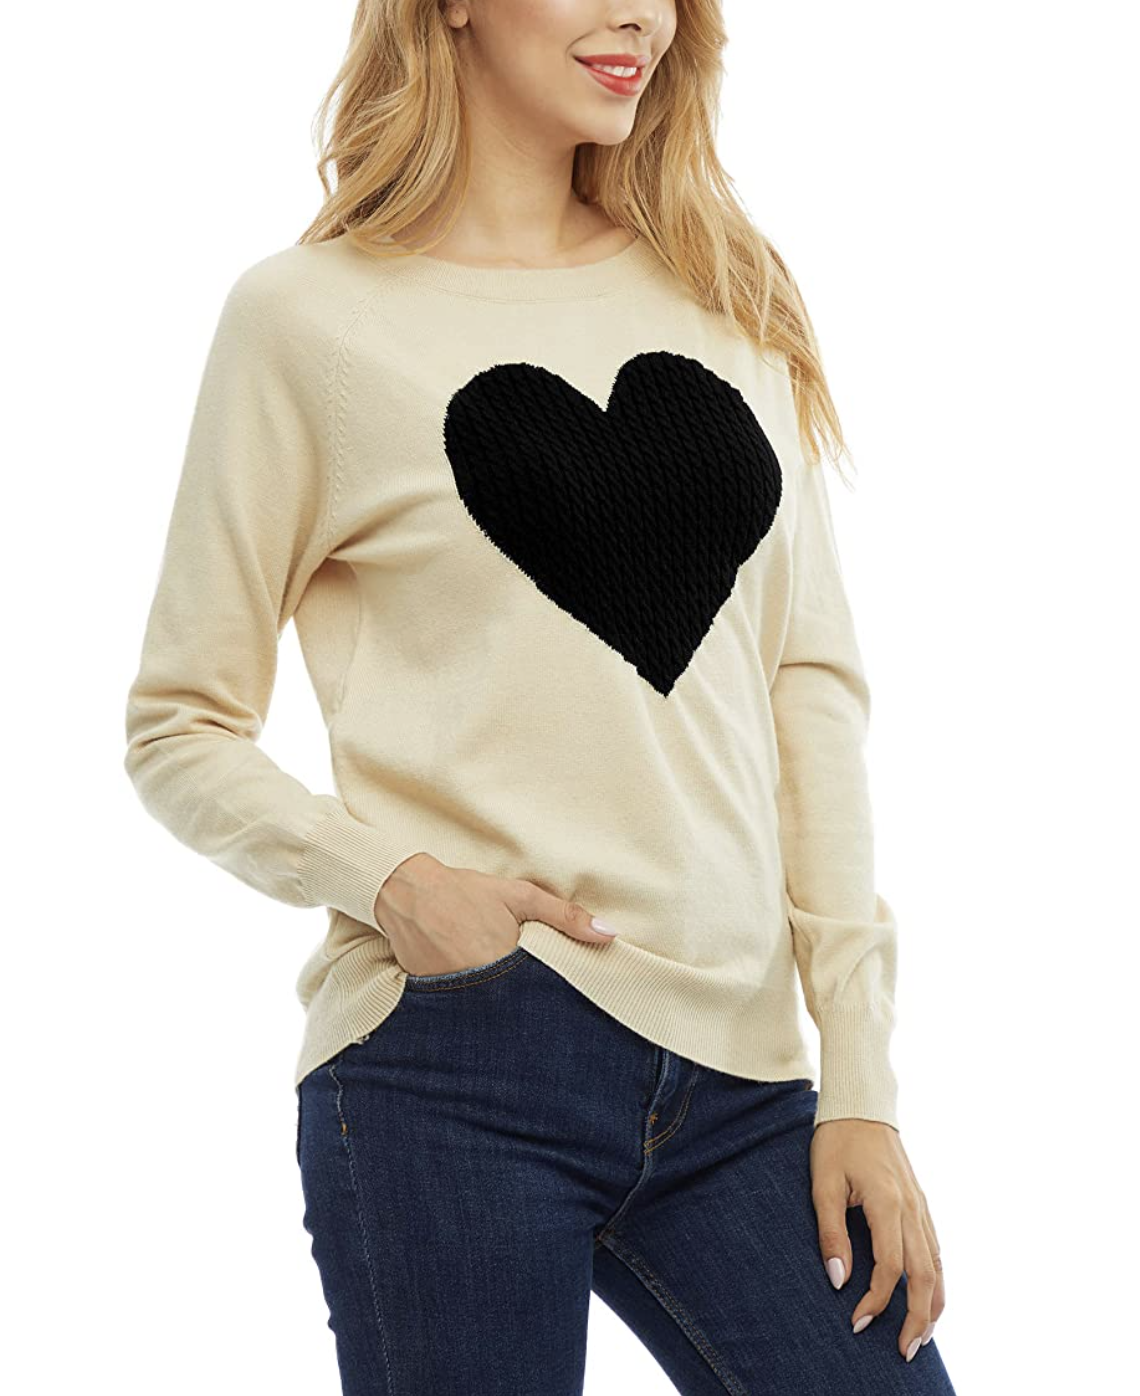 Wear Your Heart on Your Sweater Thanks to This Adorable Knit - bluemull